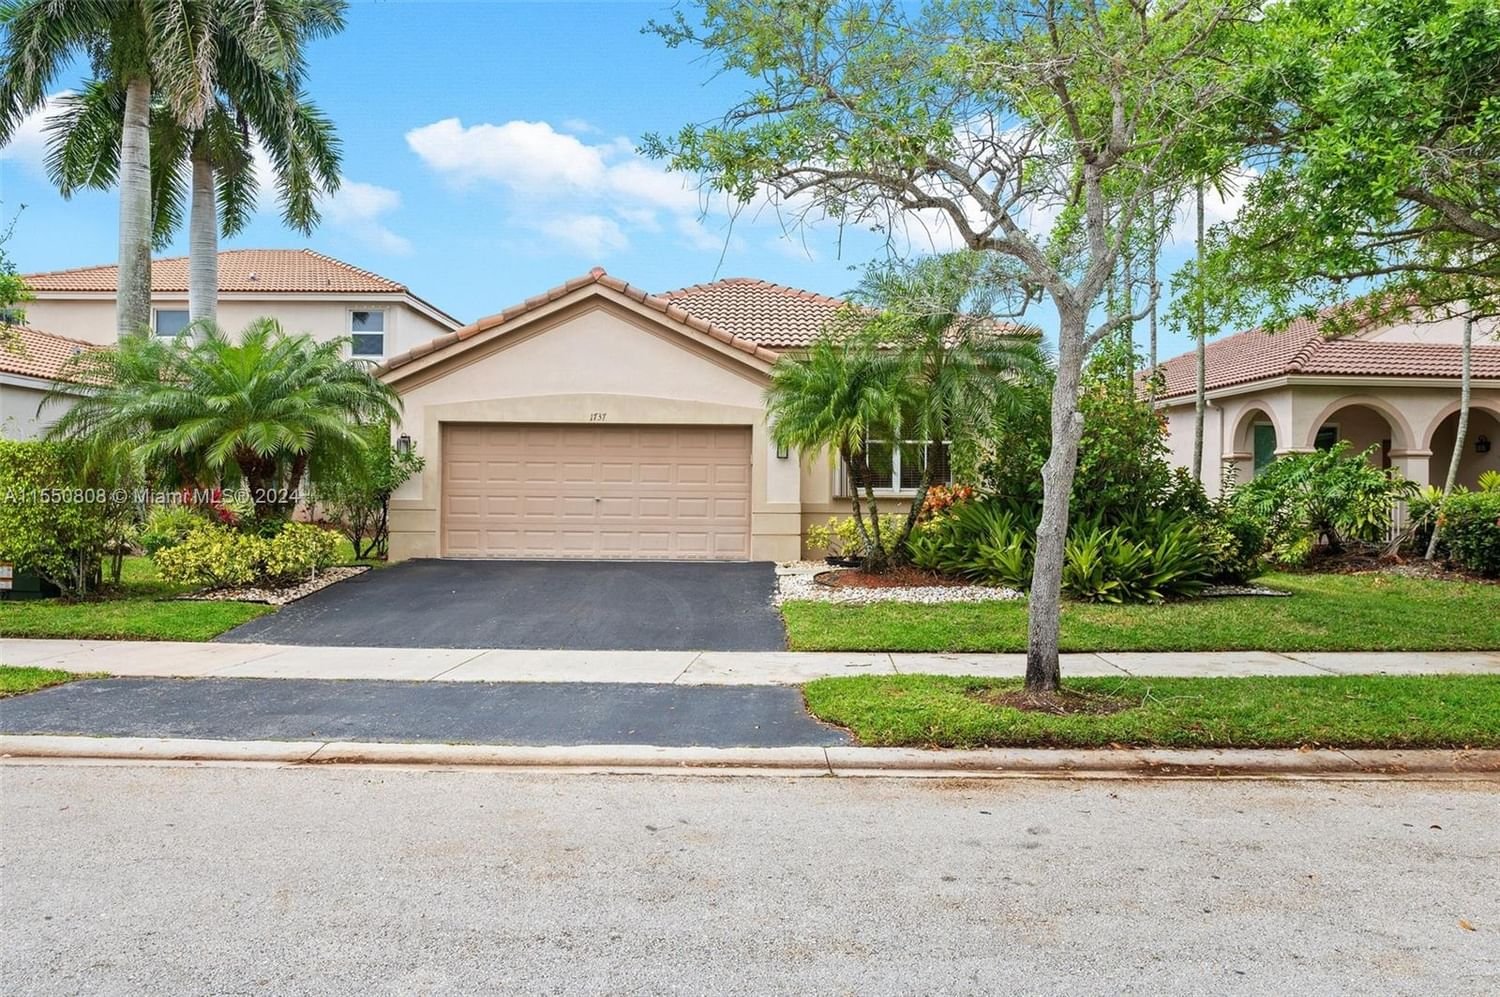 Real estate property located at 1737 Aspen Ln, Broward County, SECTOR 2- PARCELS 21B 22, Weston, FL